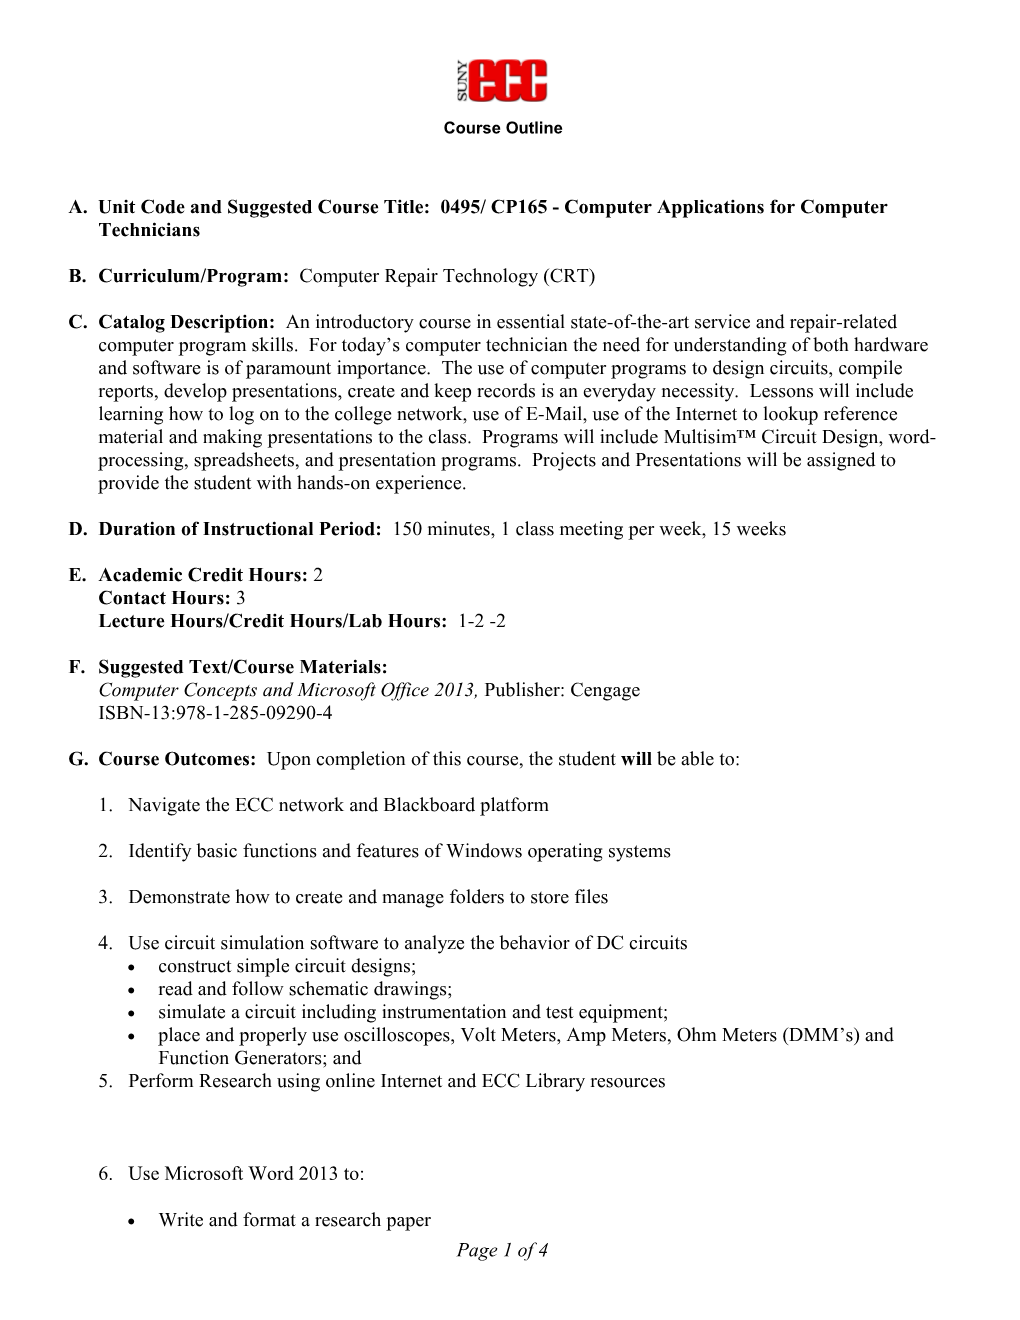 Course Outline CP-165 Computer Applications for Computer Technicians